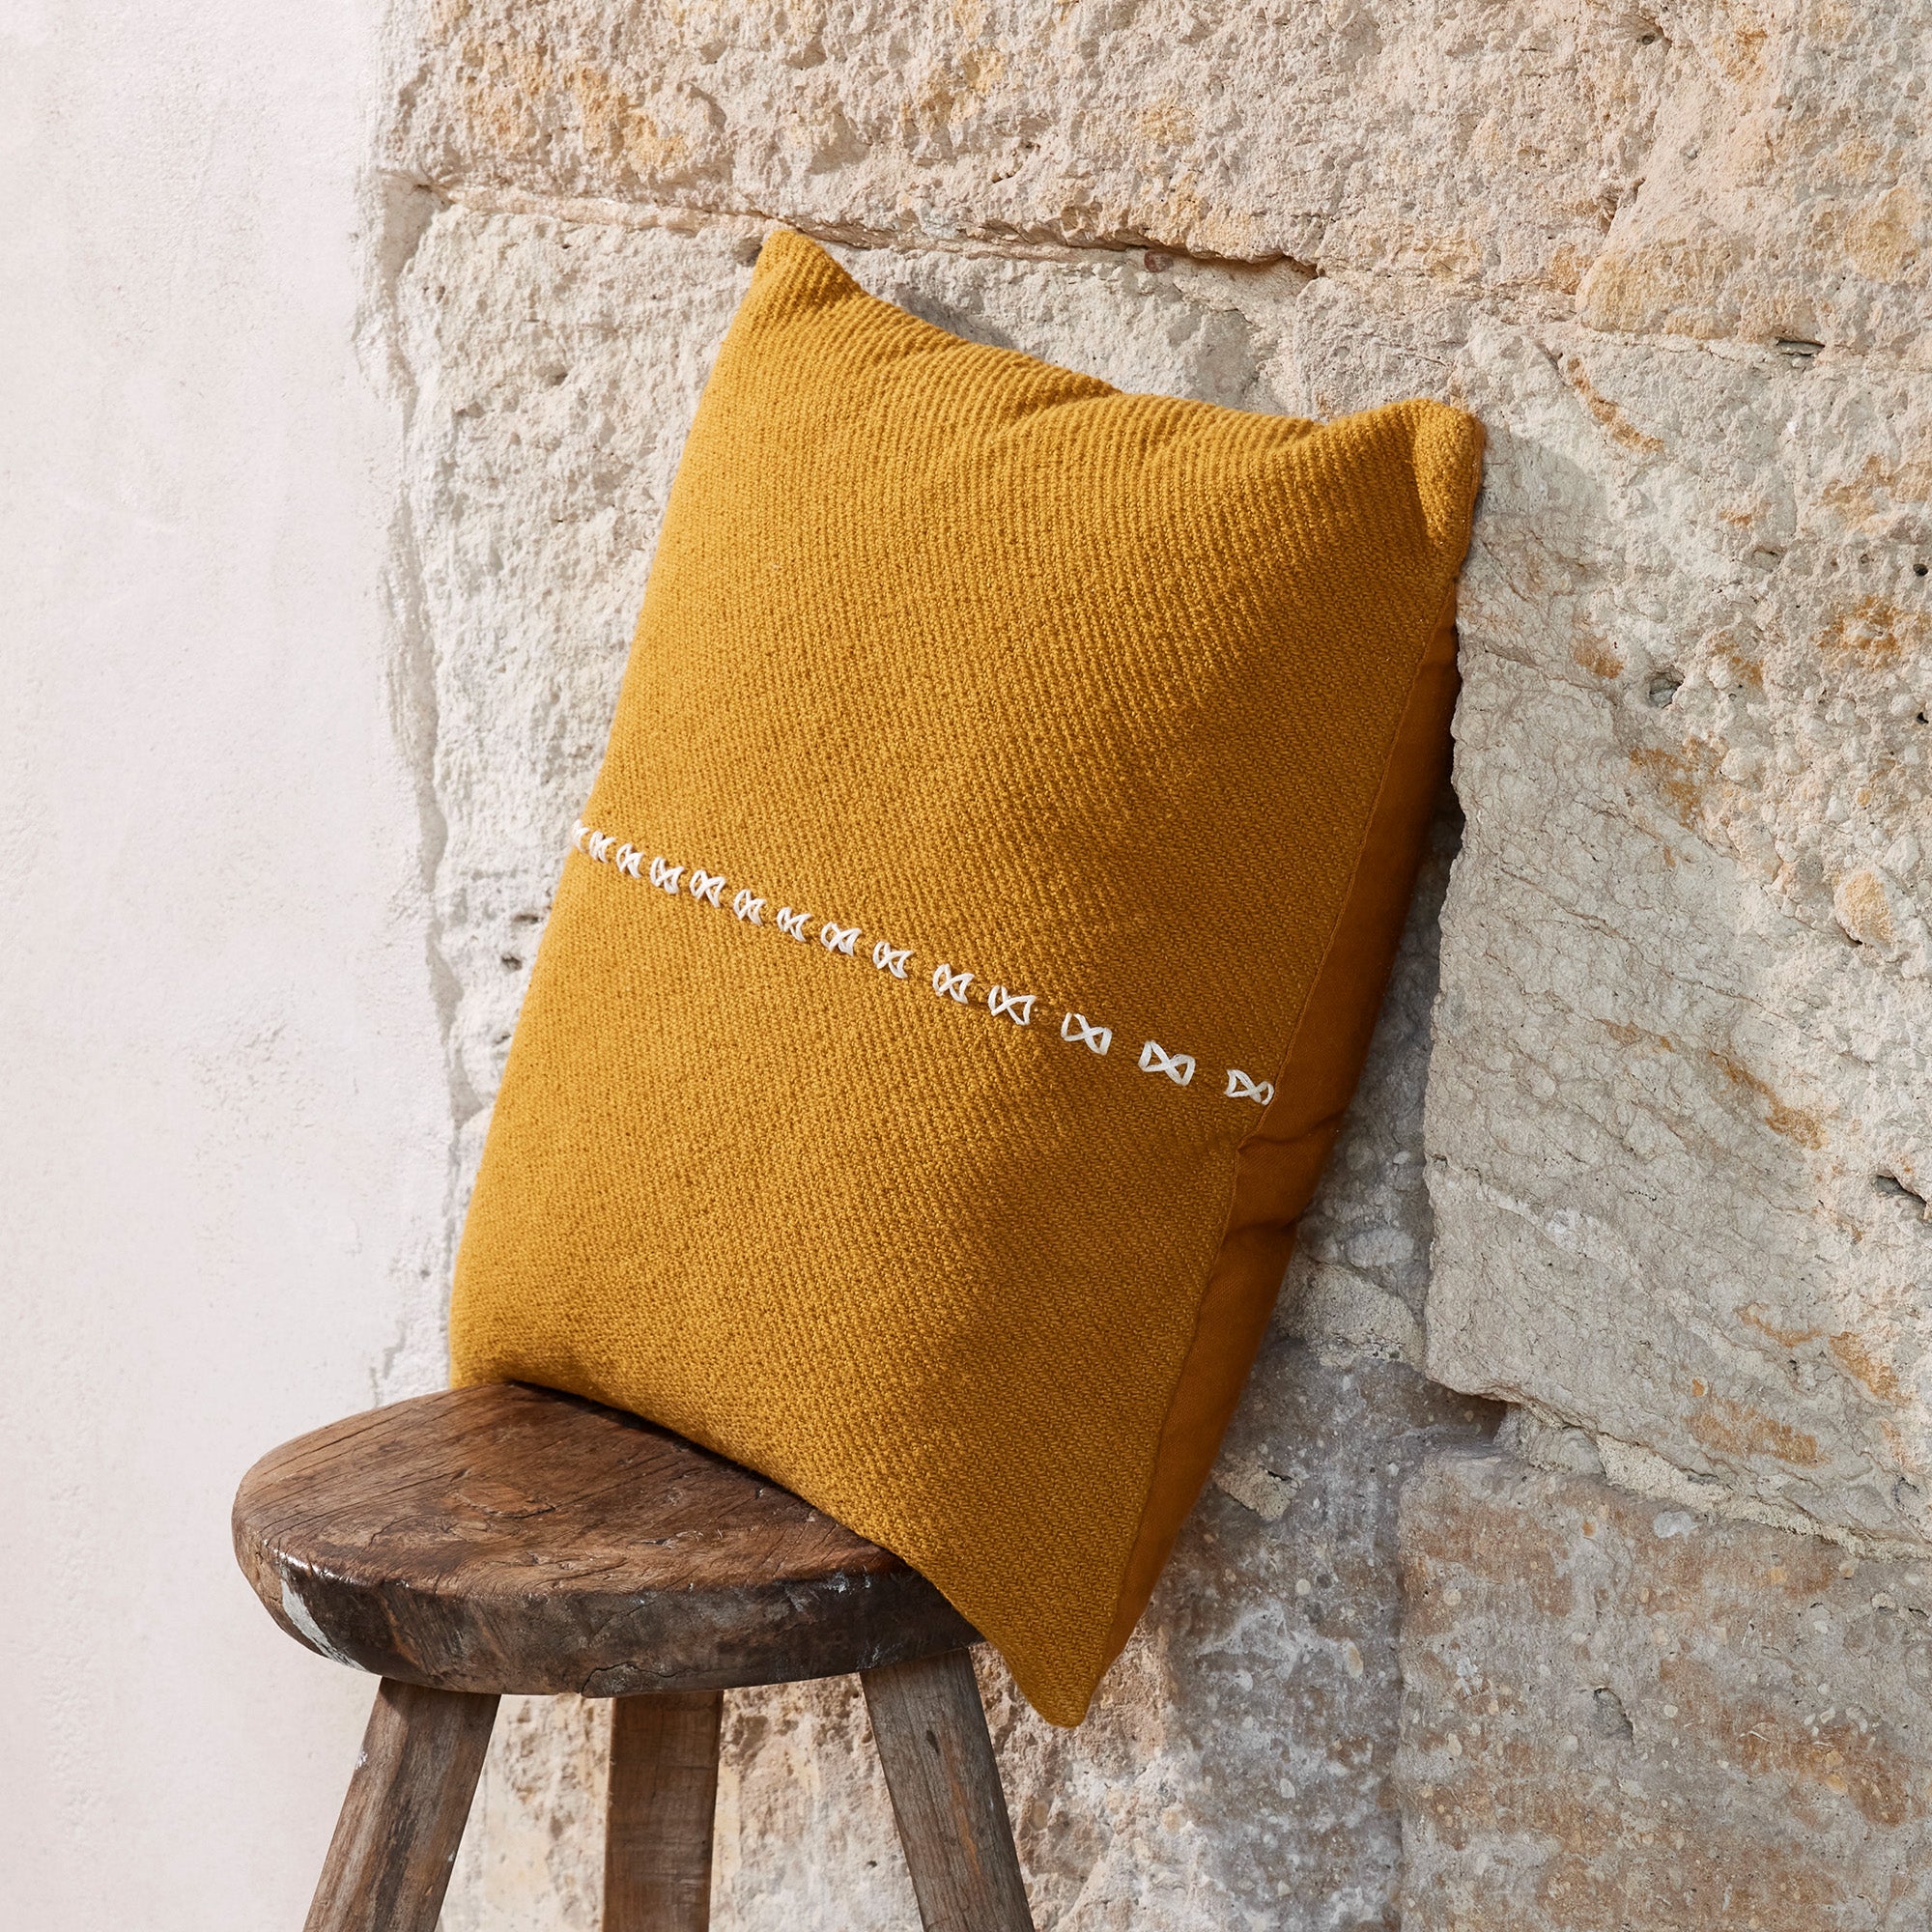 Housse de coussin WALISS curry